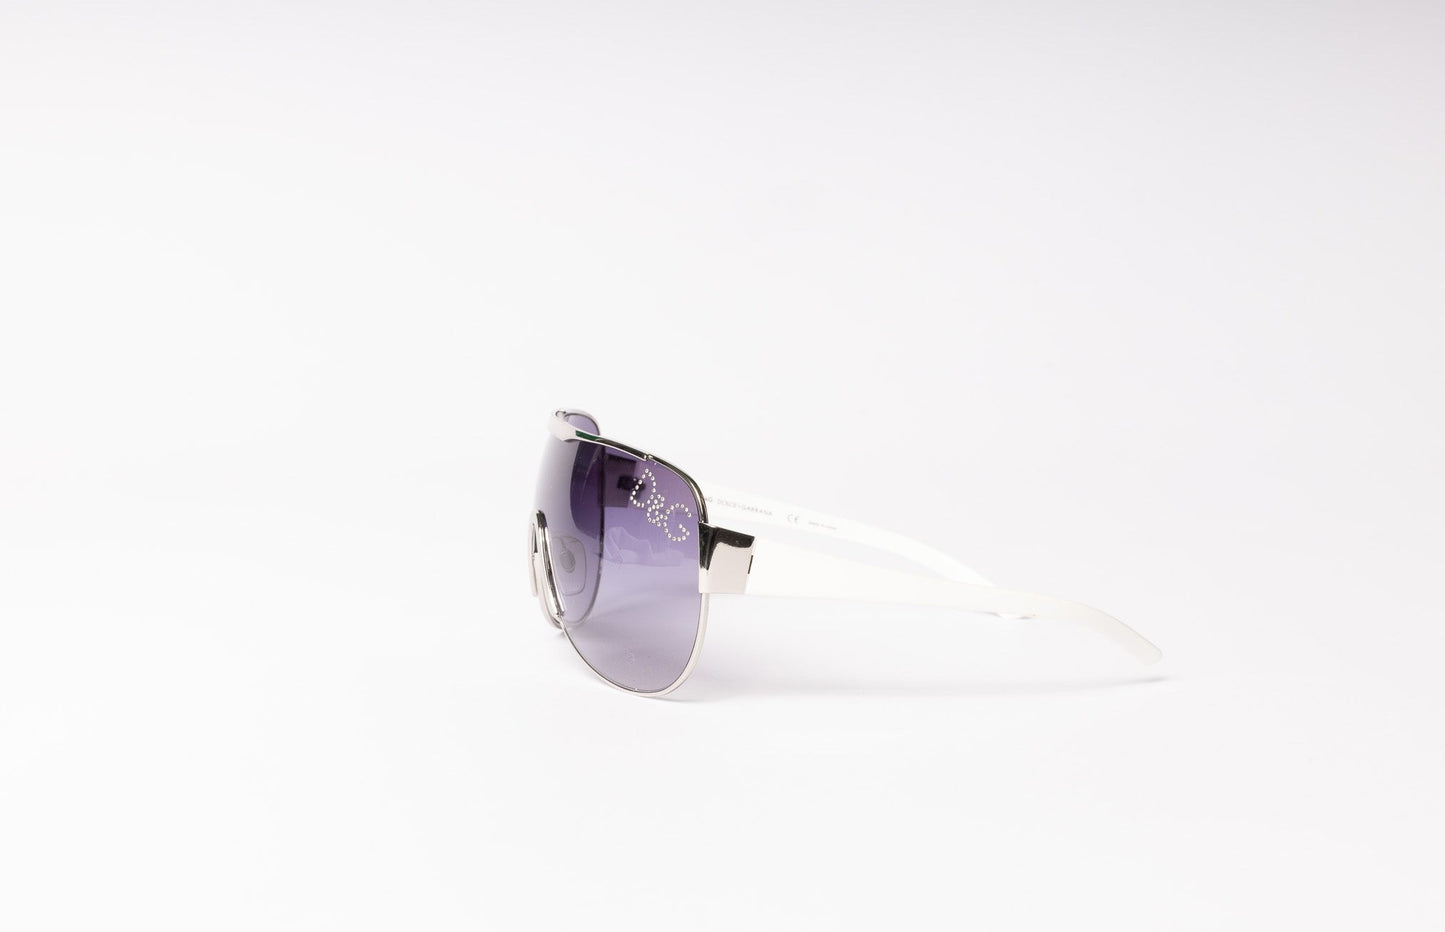 Make a glamorous statement with the exquisite D&G Crystal Sunglasses. Discover the perfect blend of fashion and luxury